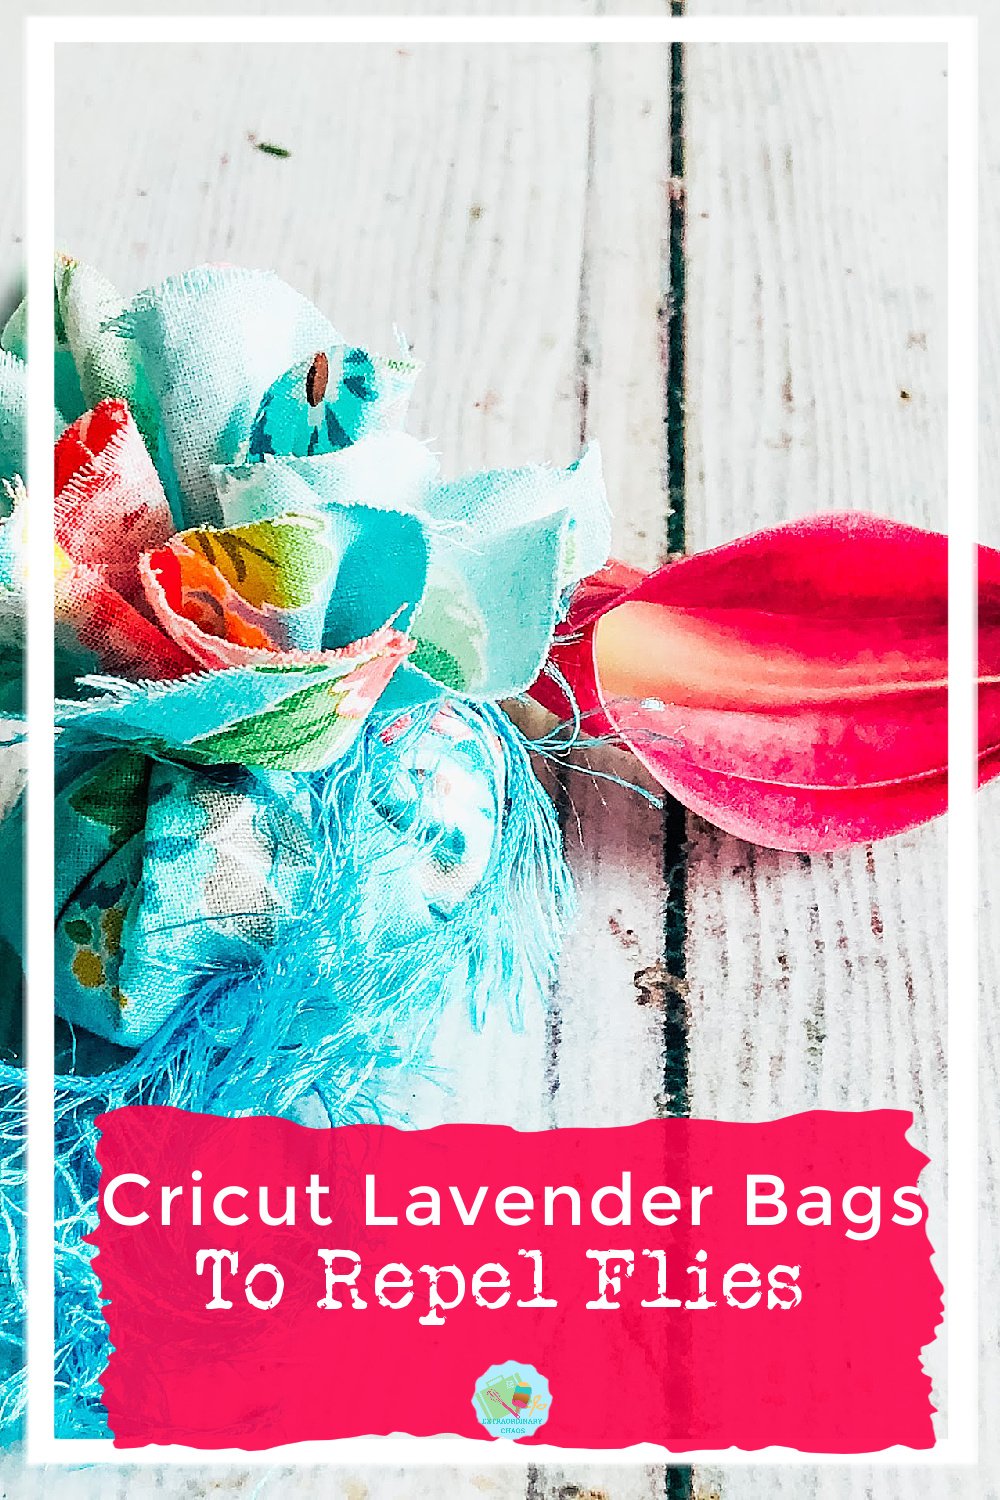 How to make Homemade Lavender Bags To Repel Flies with Cricut